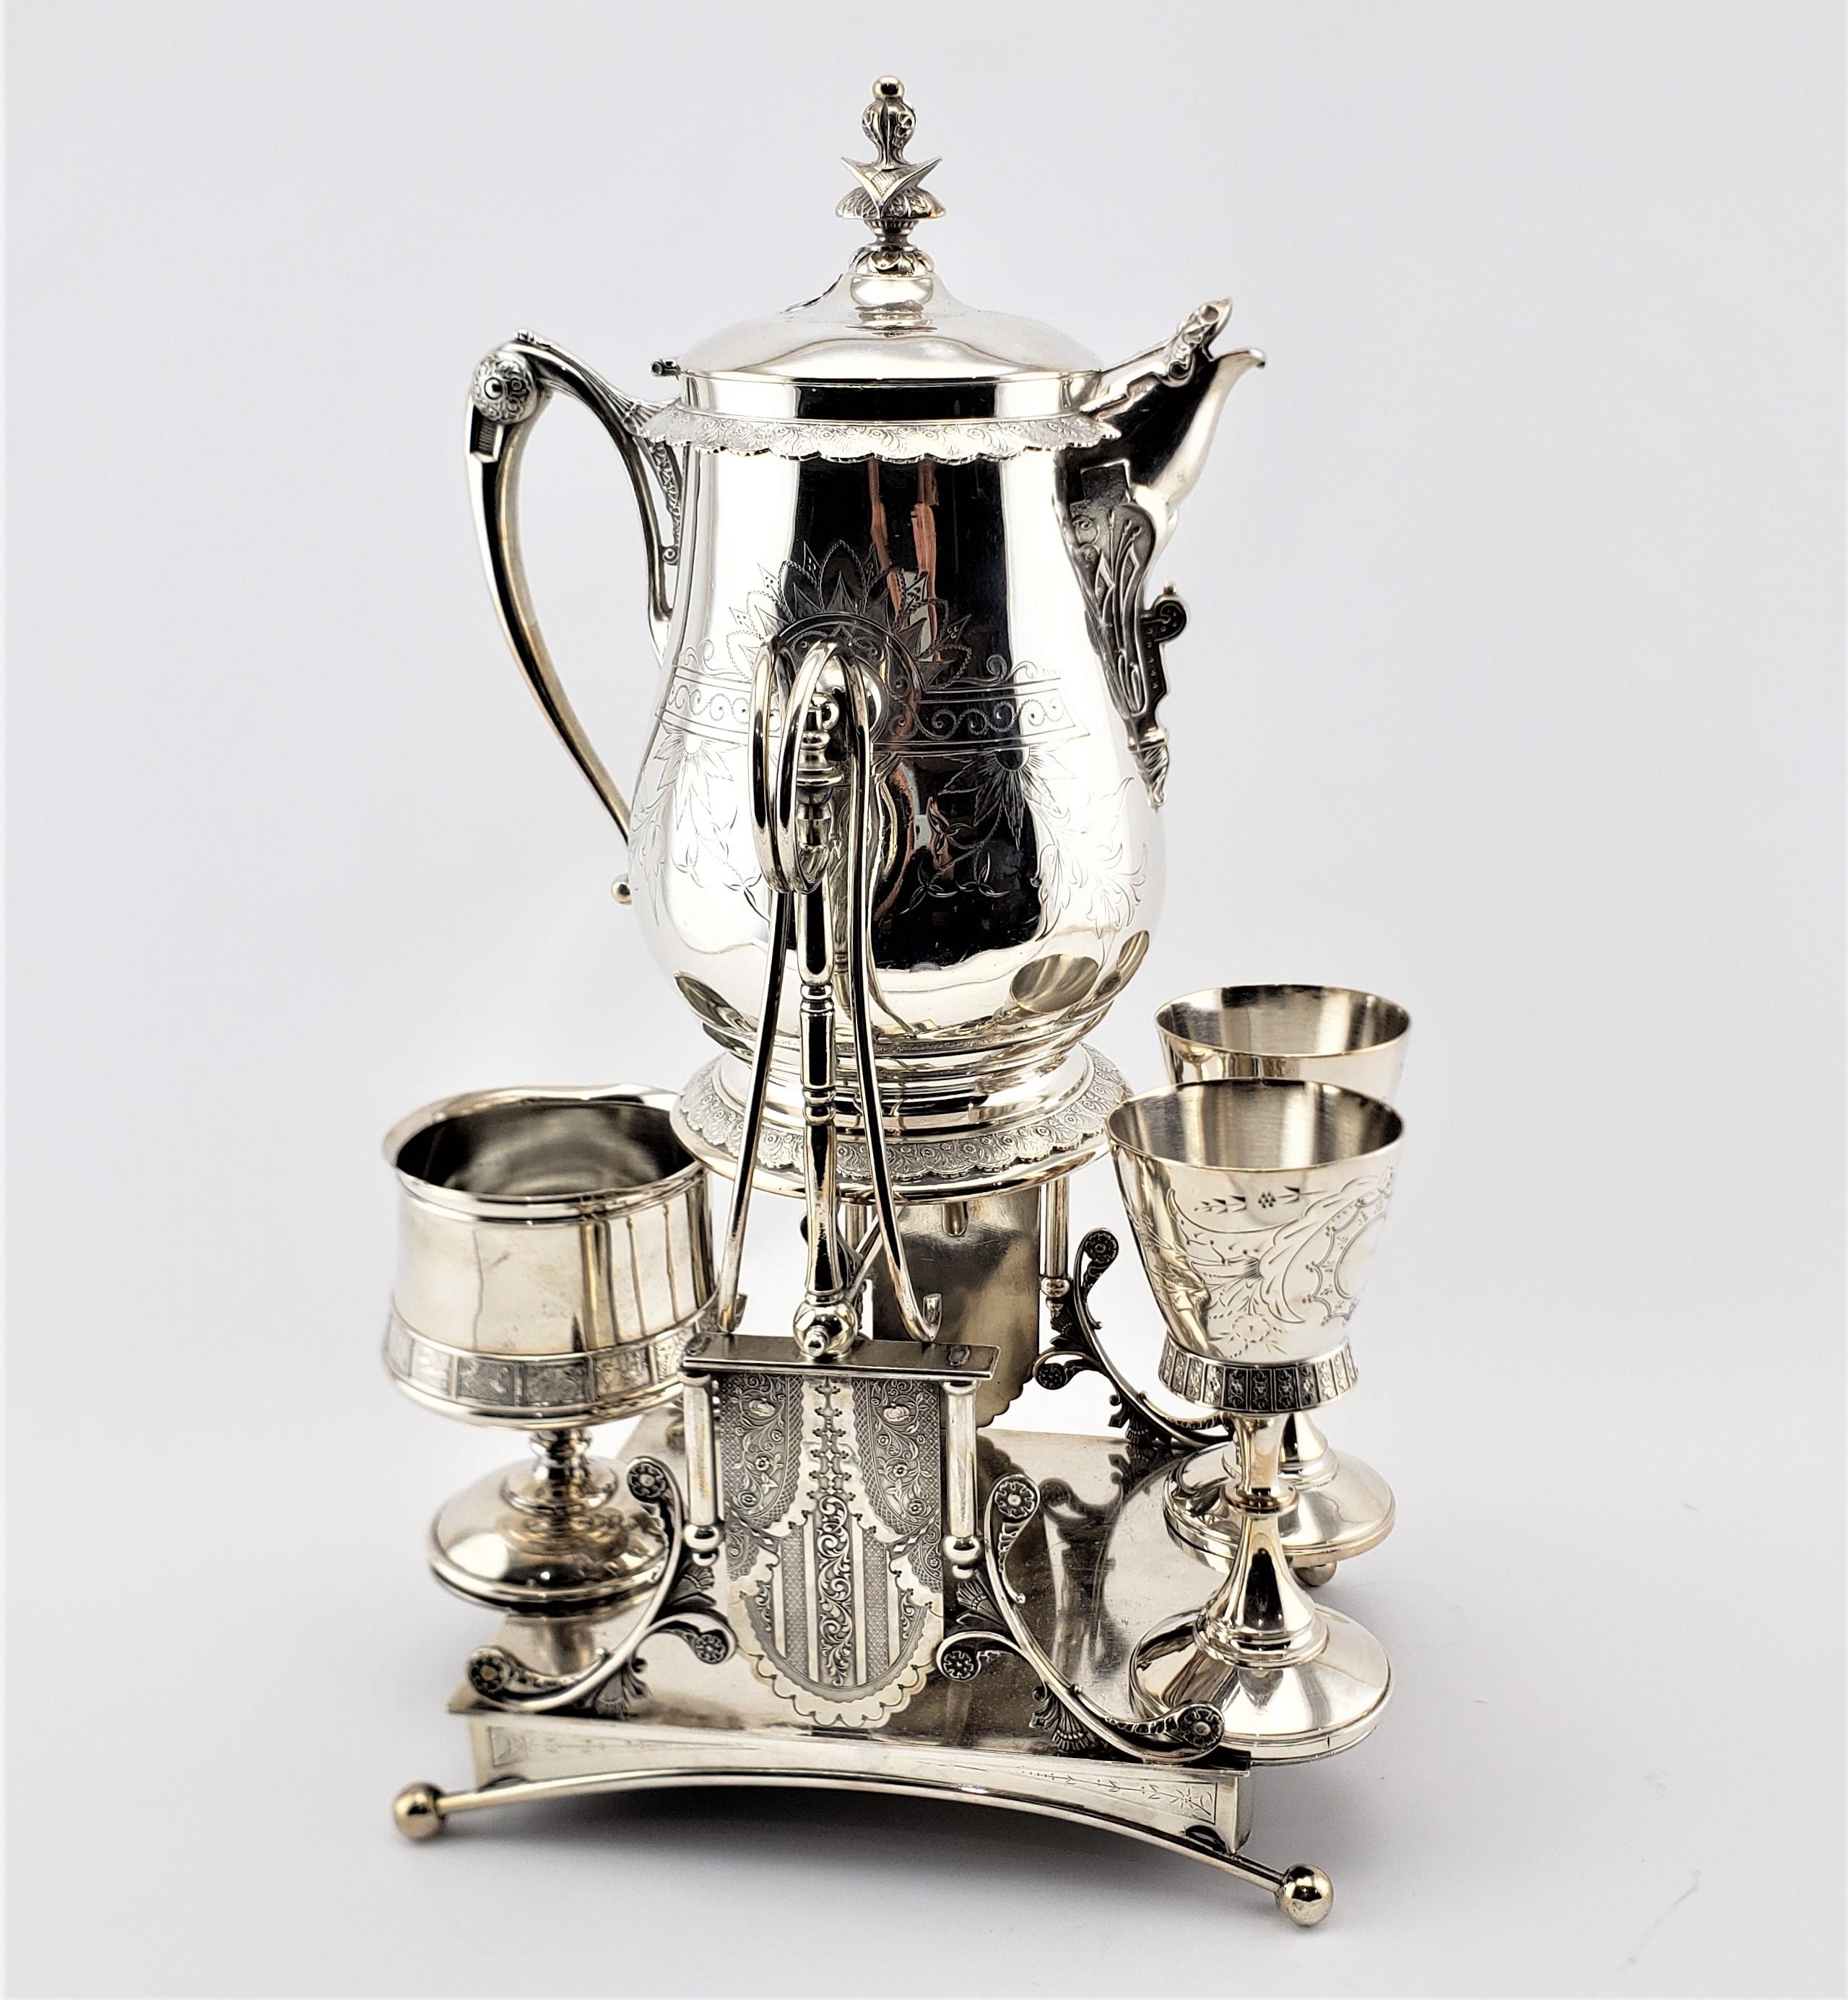 This antique and silver plated tipping ice water or lemonade stand was made by Simpson, Hall, Miller & Co. in approximately 1900 in the period Edwardian style. The set is composed of a sturdy silver plated stand, a large tipping pot, two silver